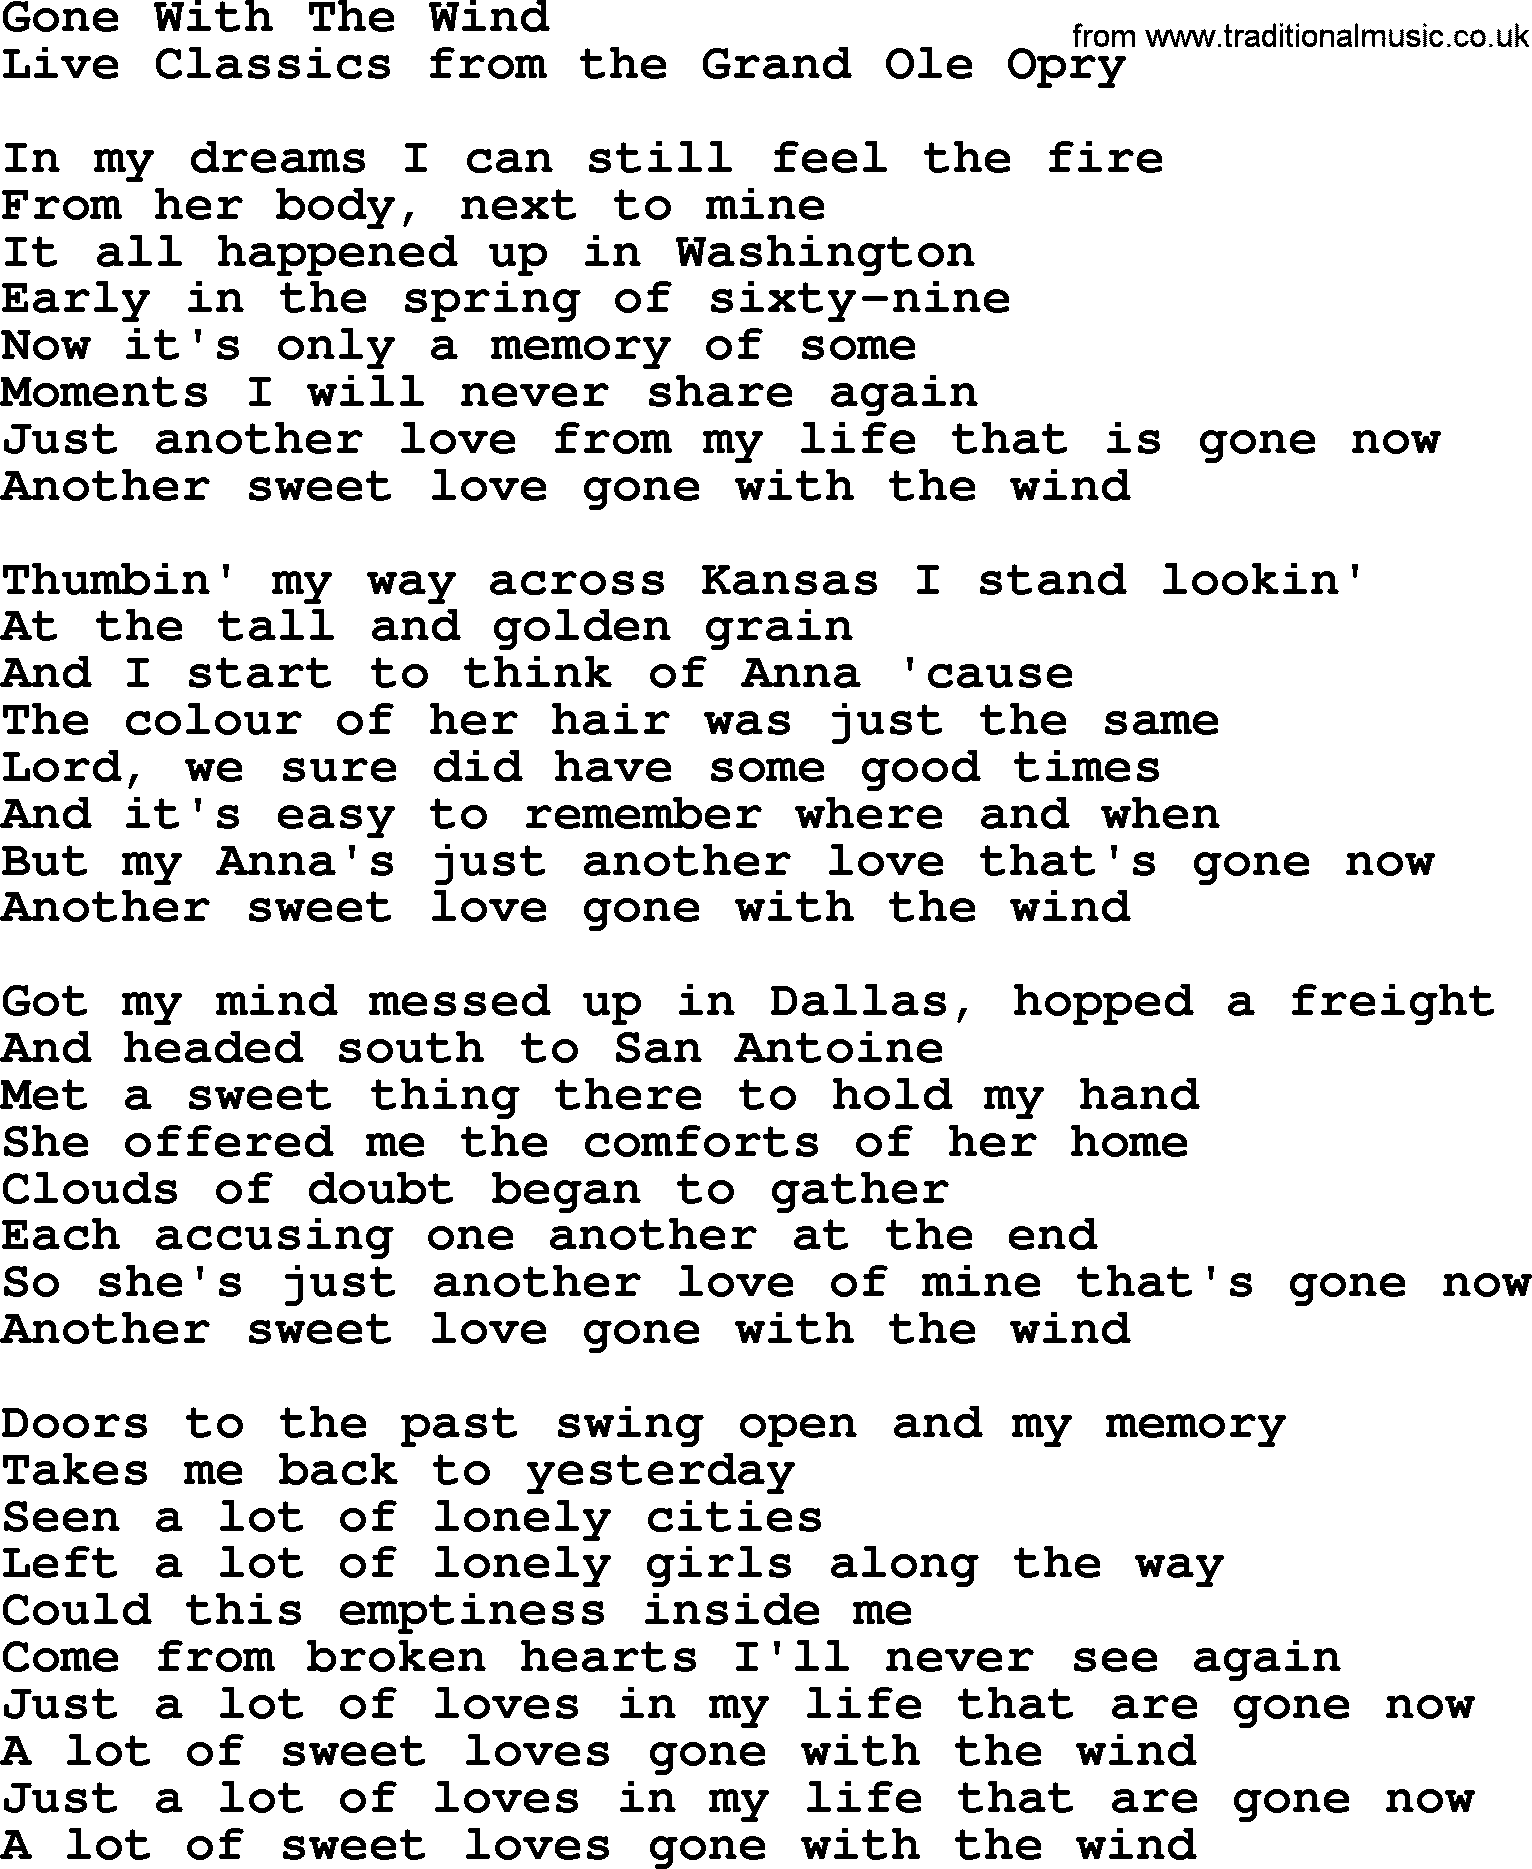 Marty Robbins song: Gone With The Wind, lyrics